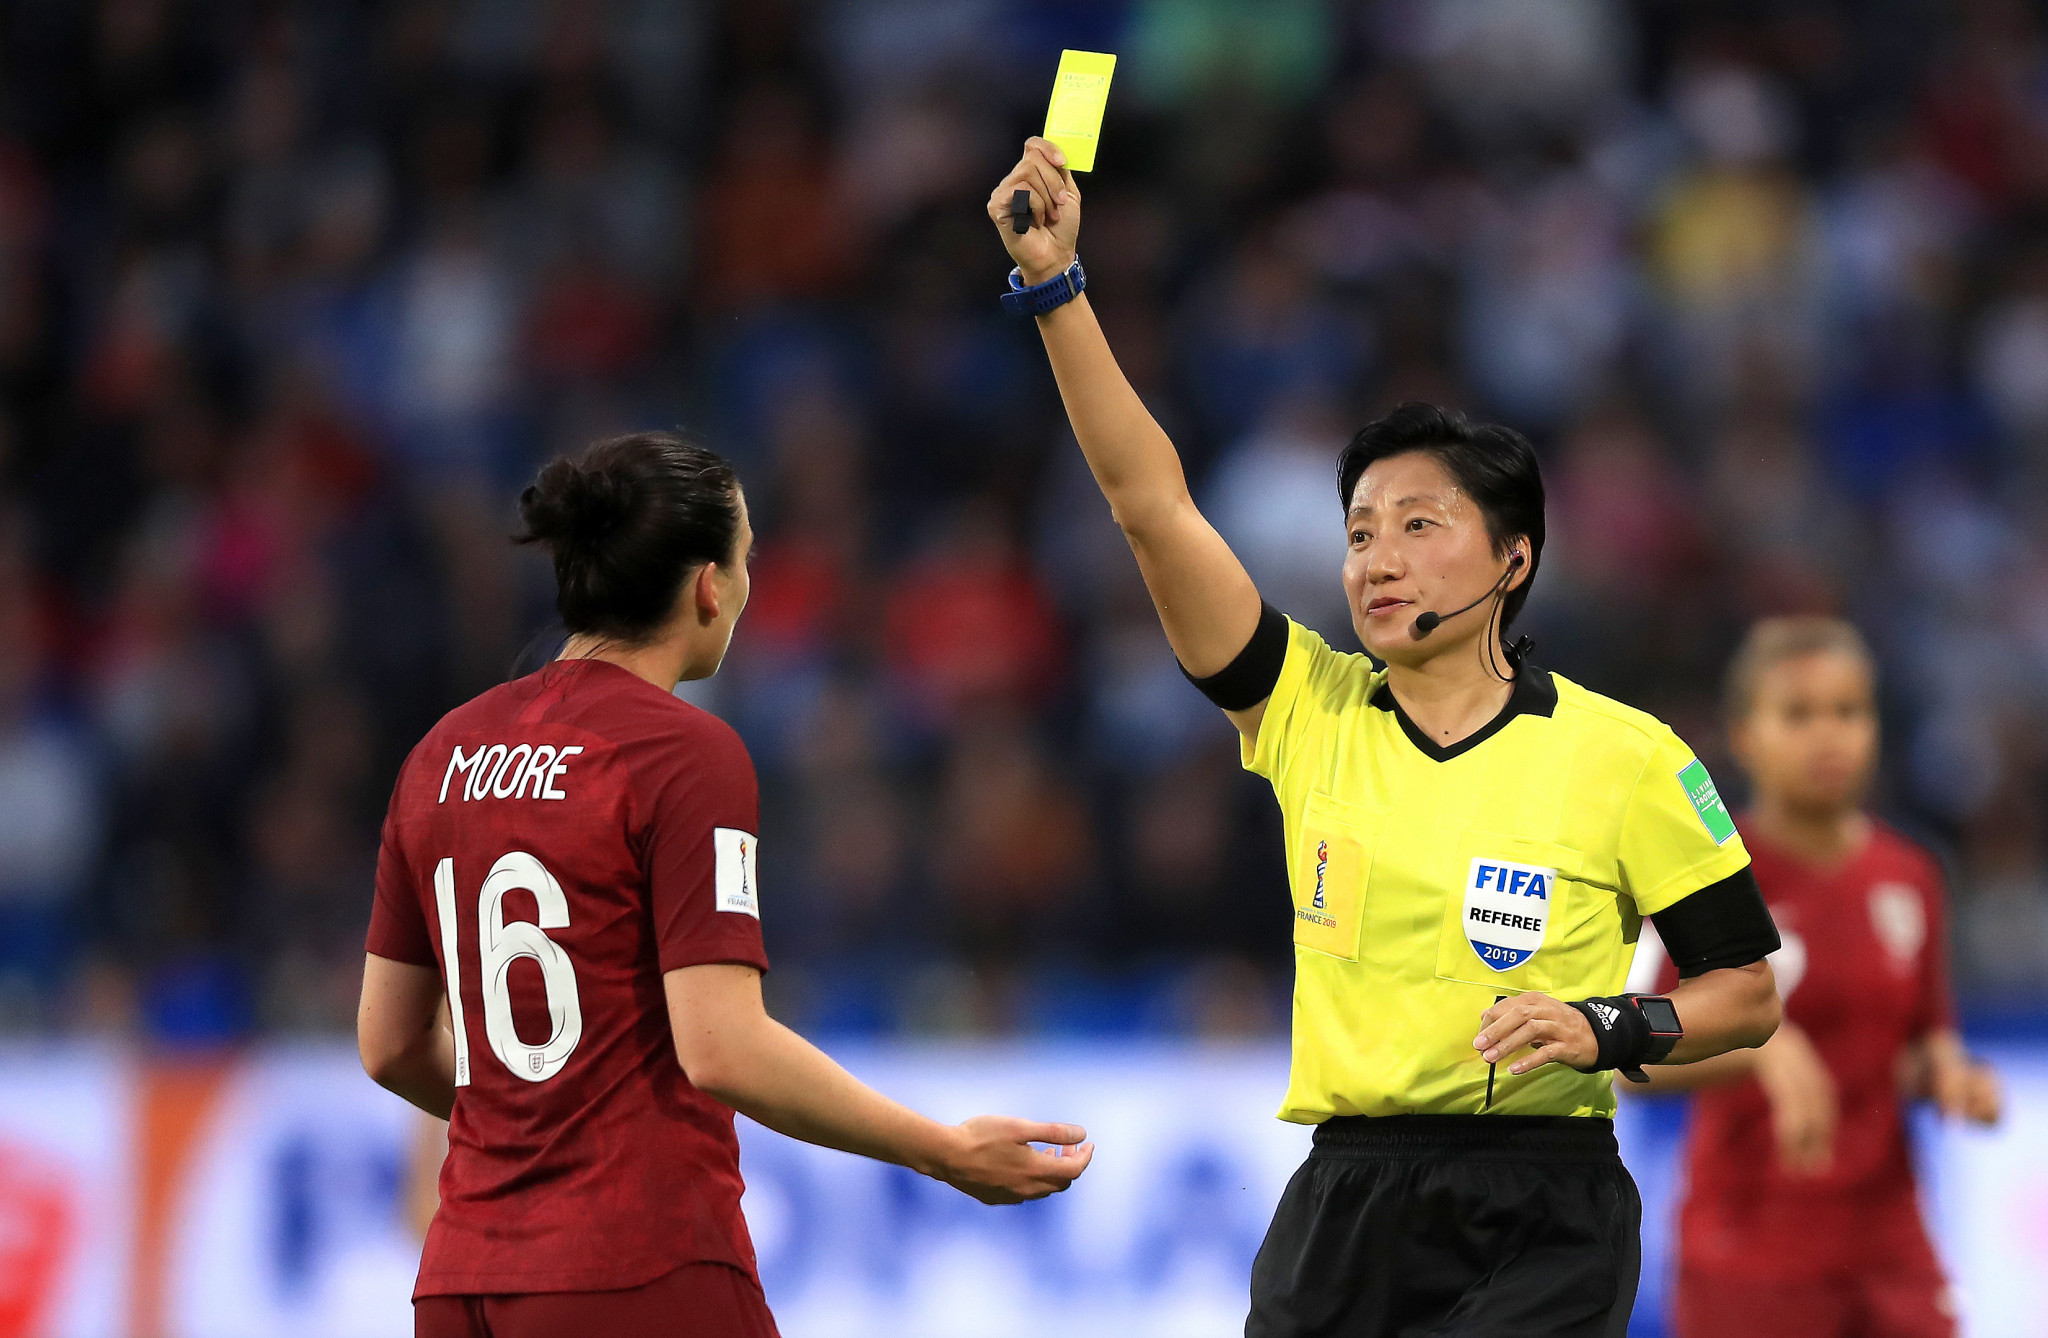 Referee Liang Qin shows Jade Moore of England a yellow card ©Getty Images